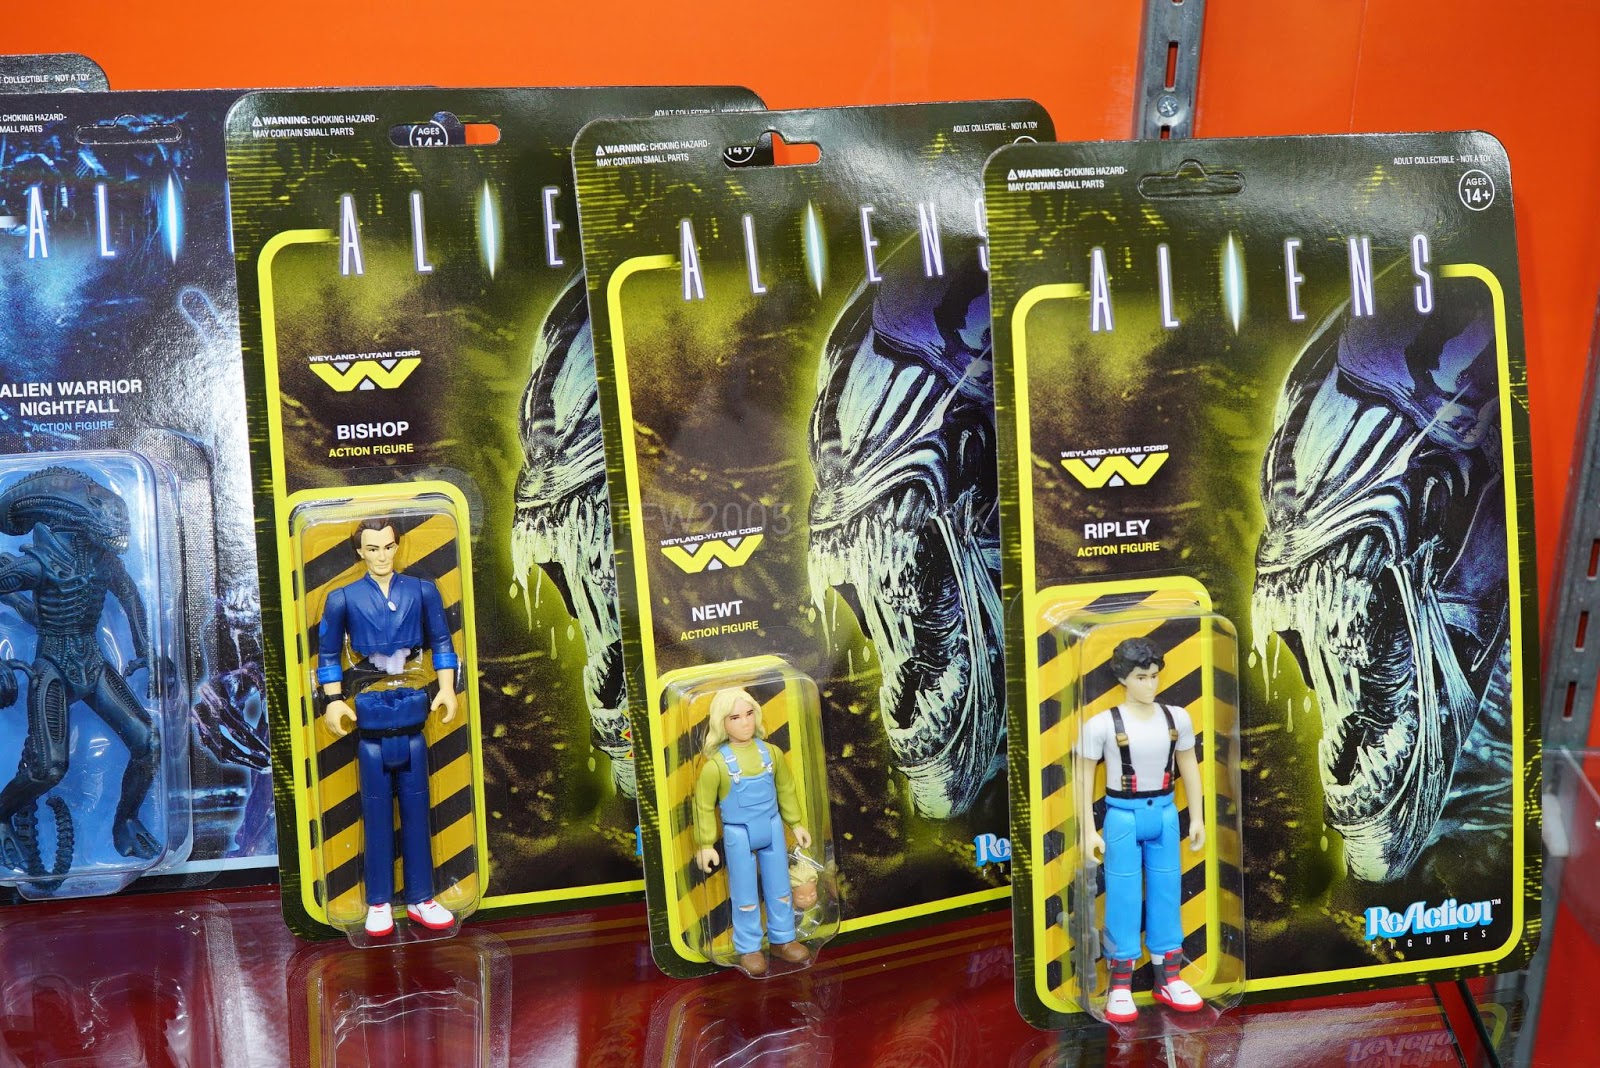 Upcoming New ReAction Figures from Super7 (Seen at New York Toy